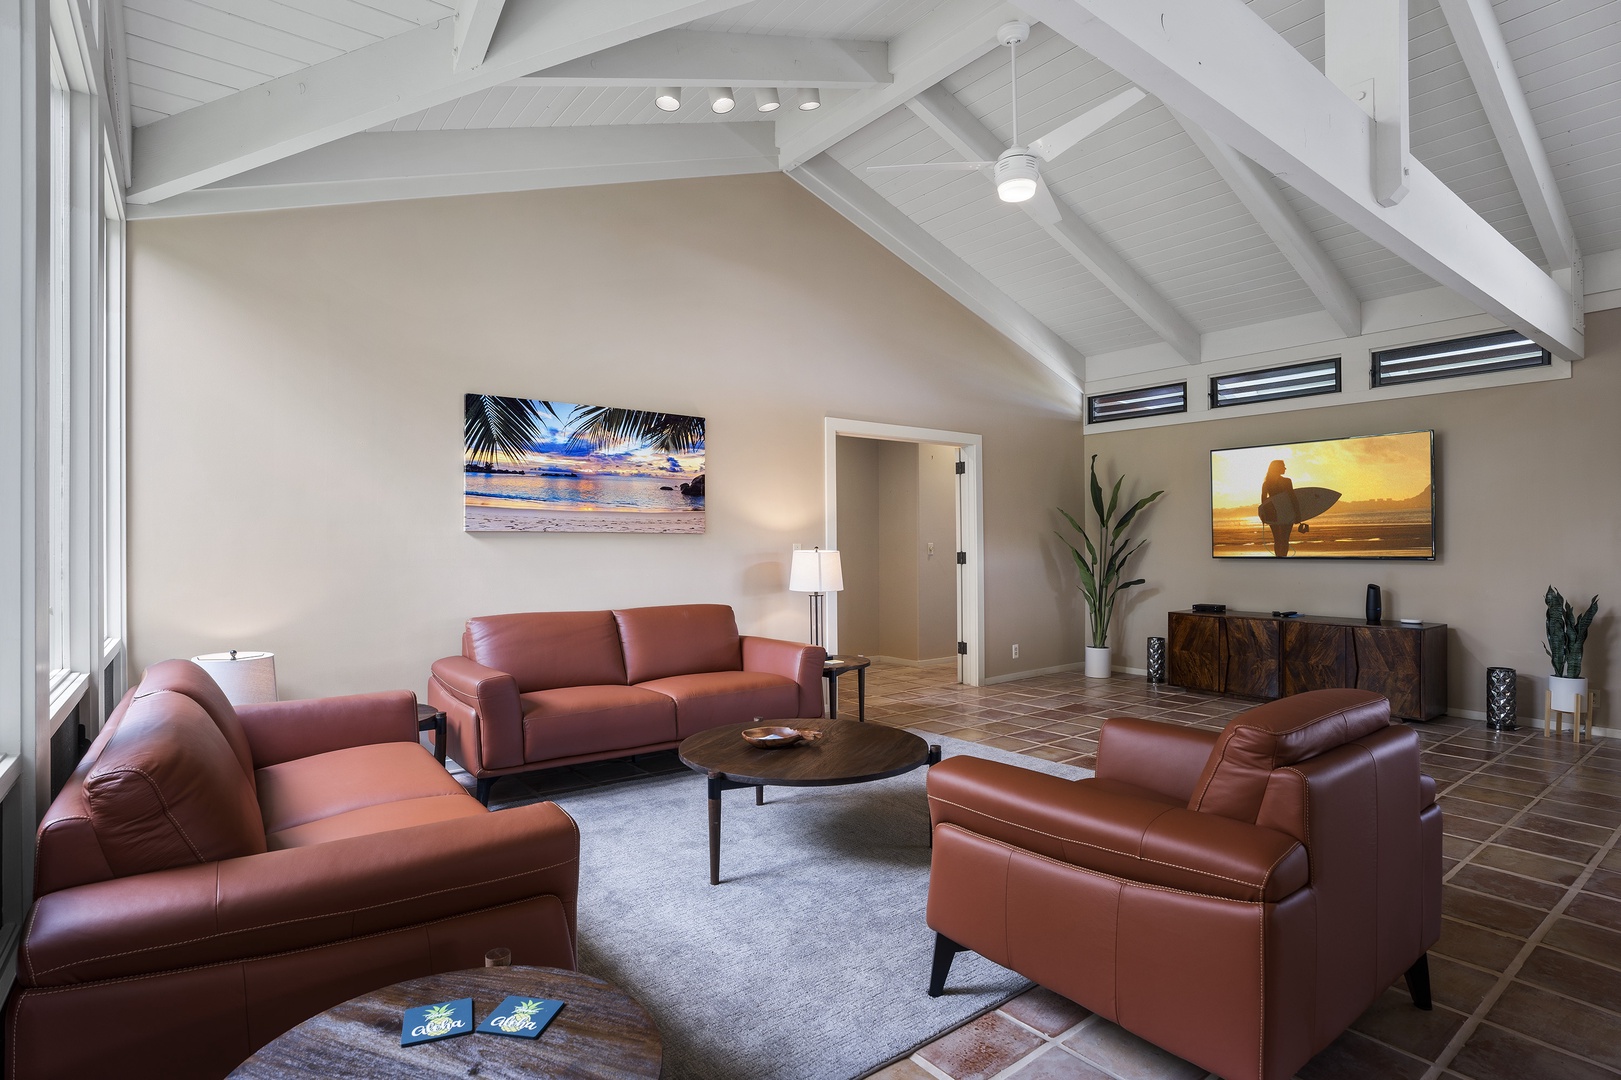 Kailua Kona Vacation Rentals, Pineapple House - Vaulted ceilings and wonderful air movement make this space comfortable